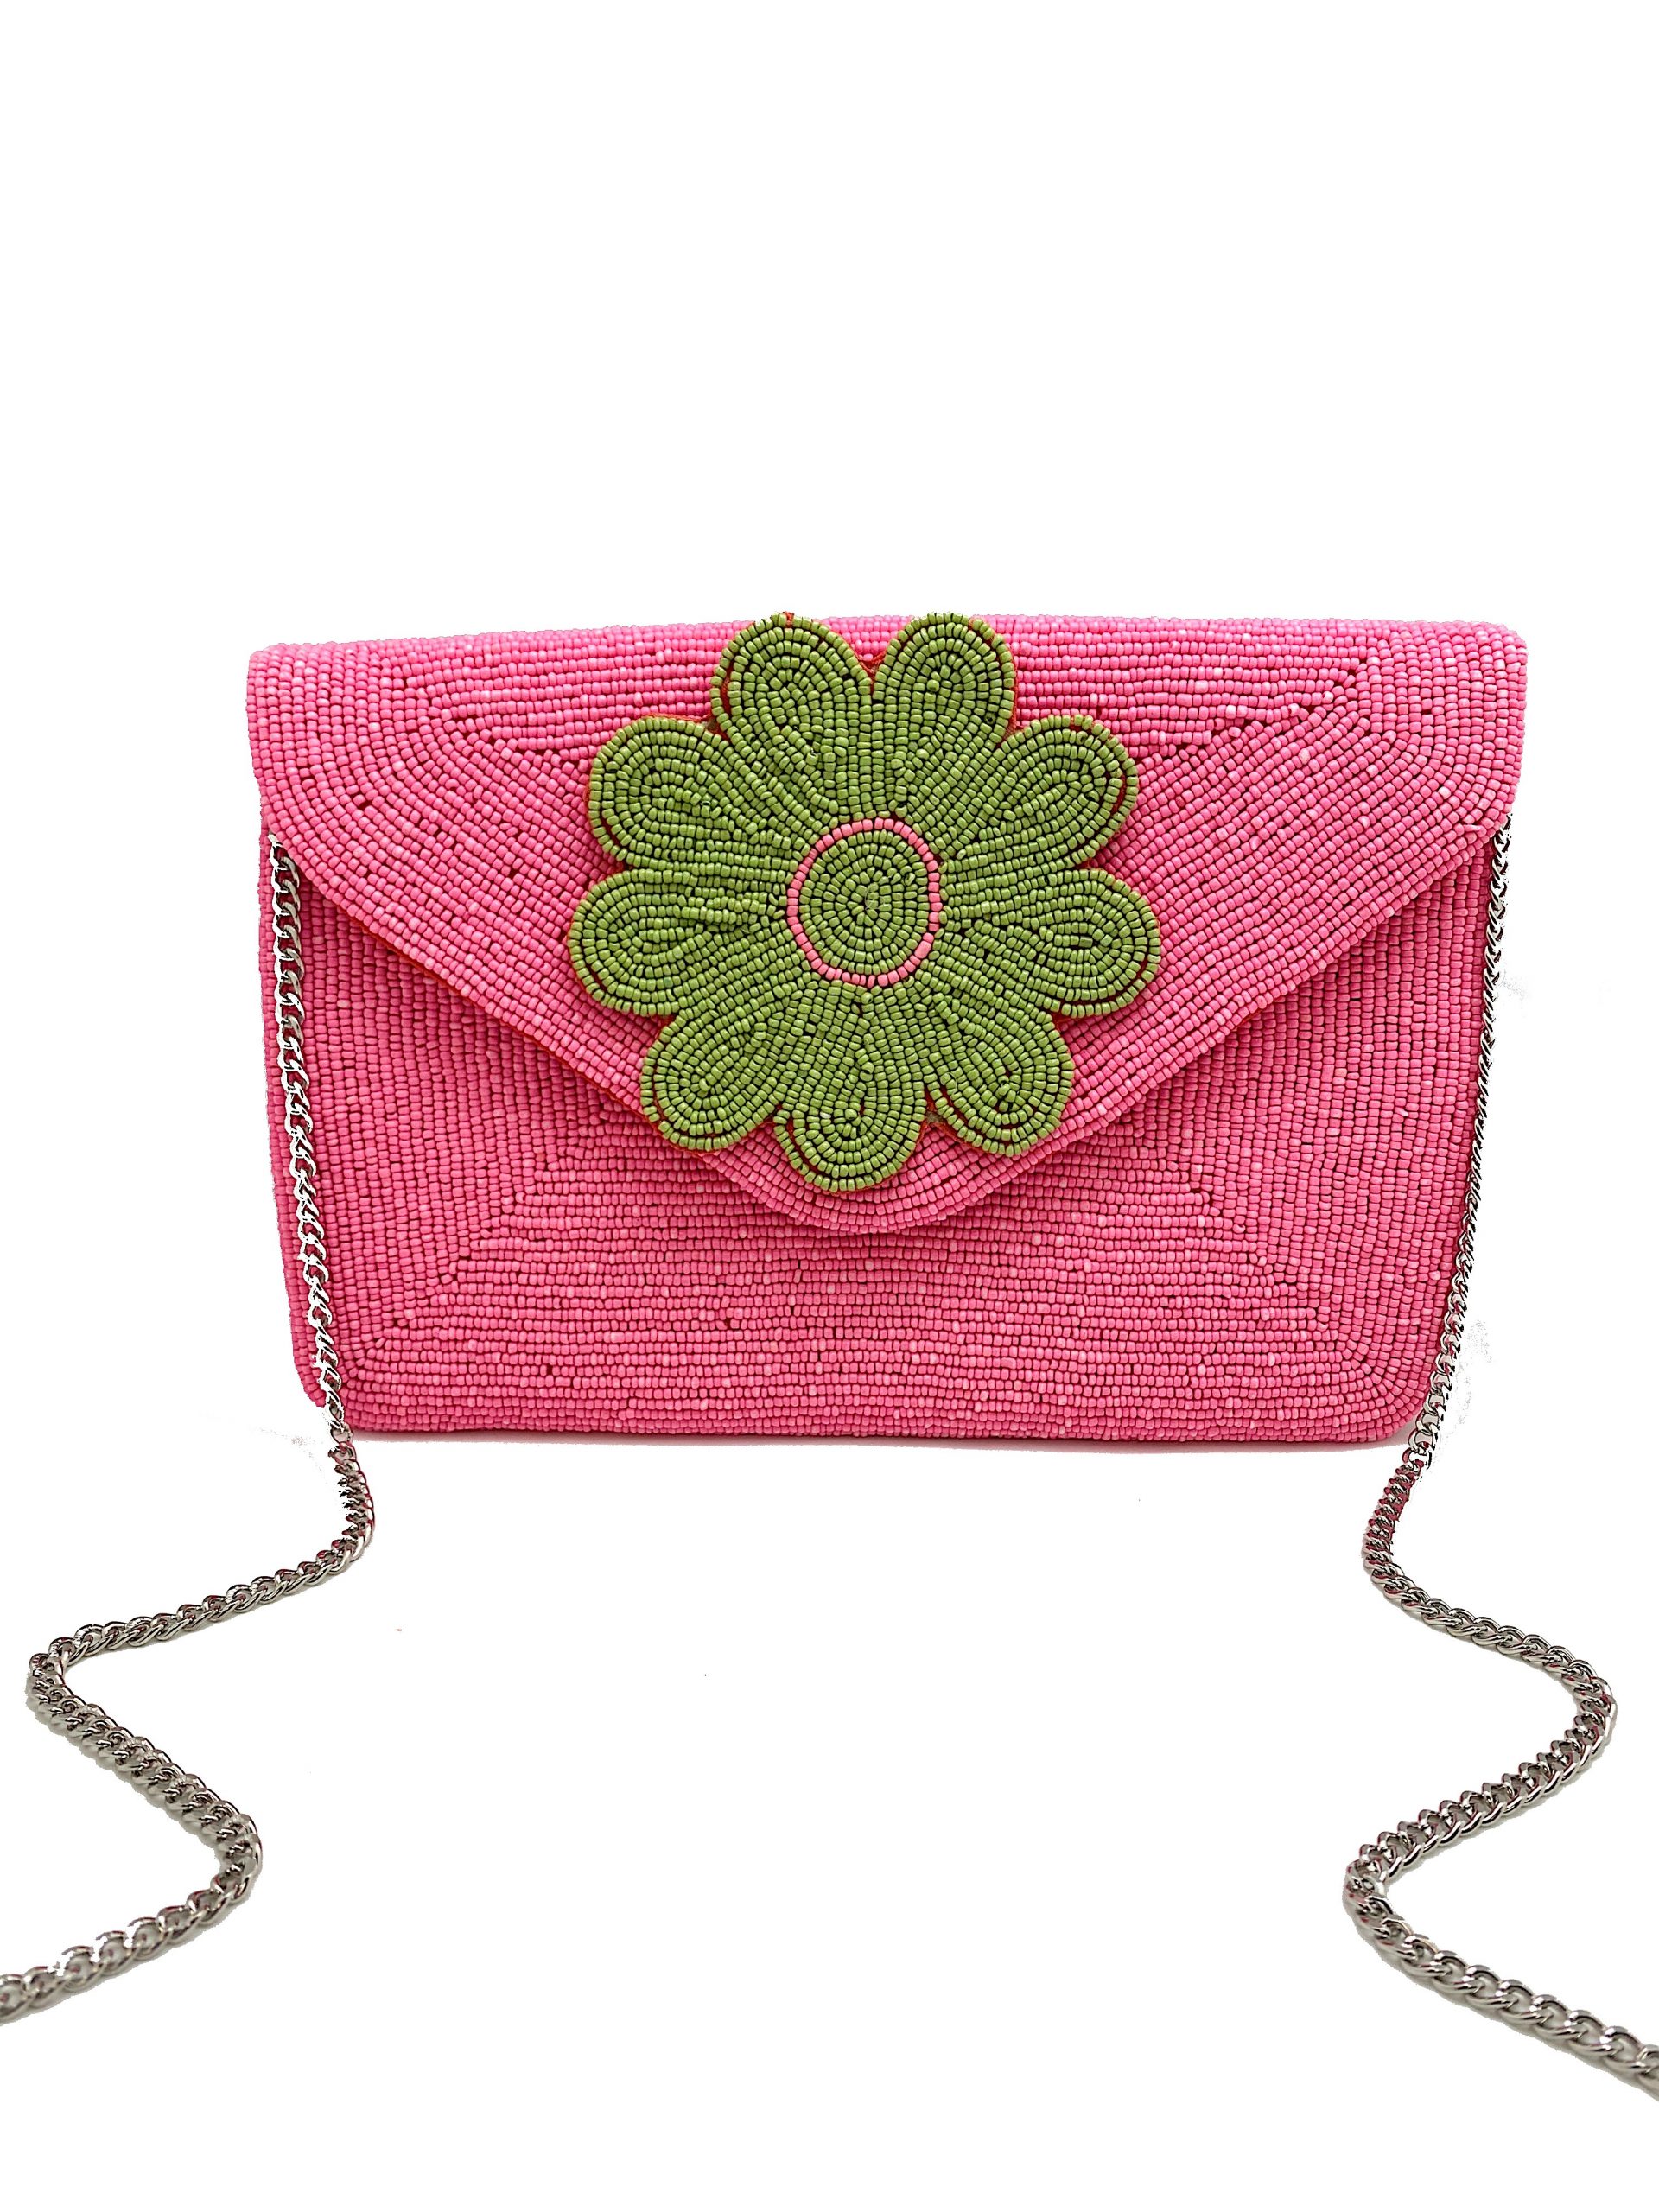 NEW NEW NEW Clutch me I'm Yours Pink and Green Envelope Clutch - Kura ...